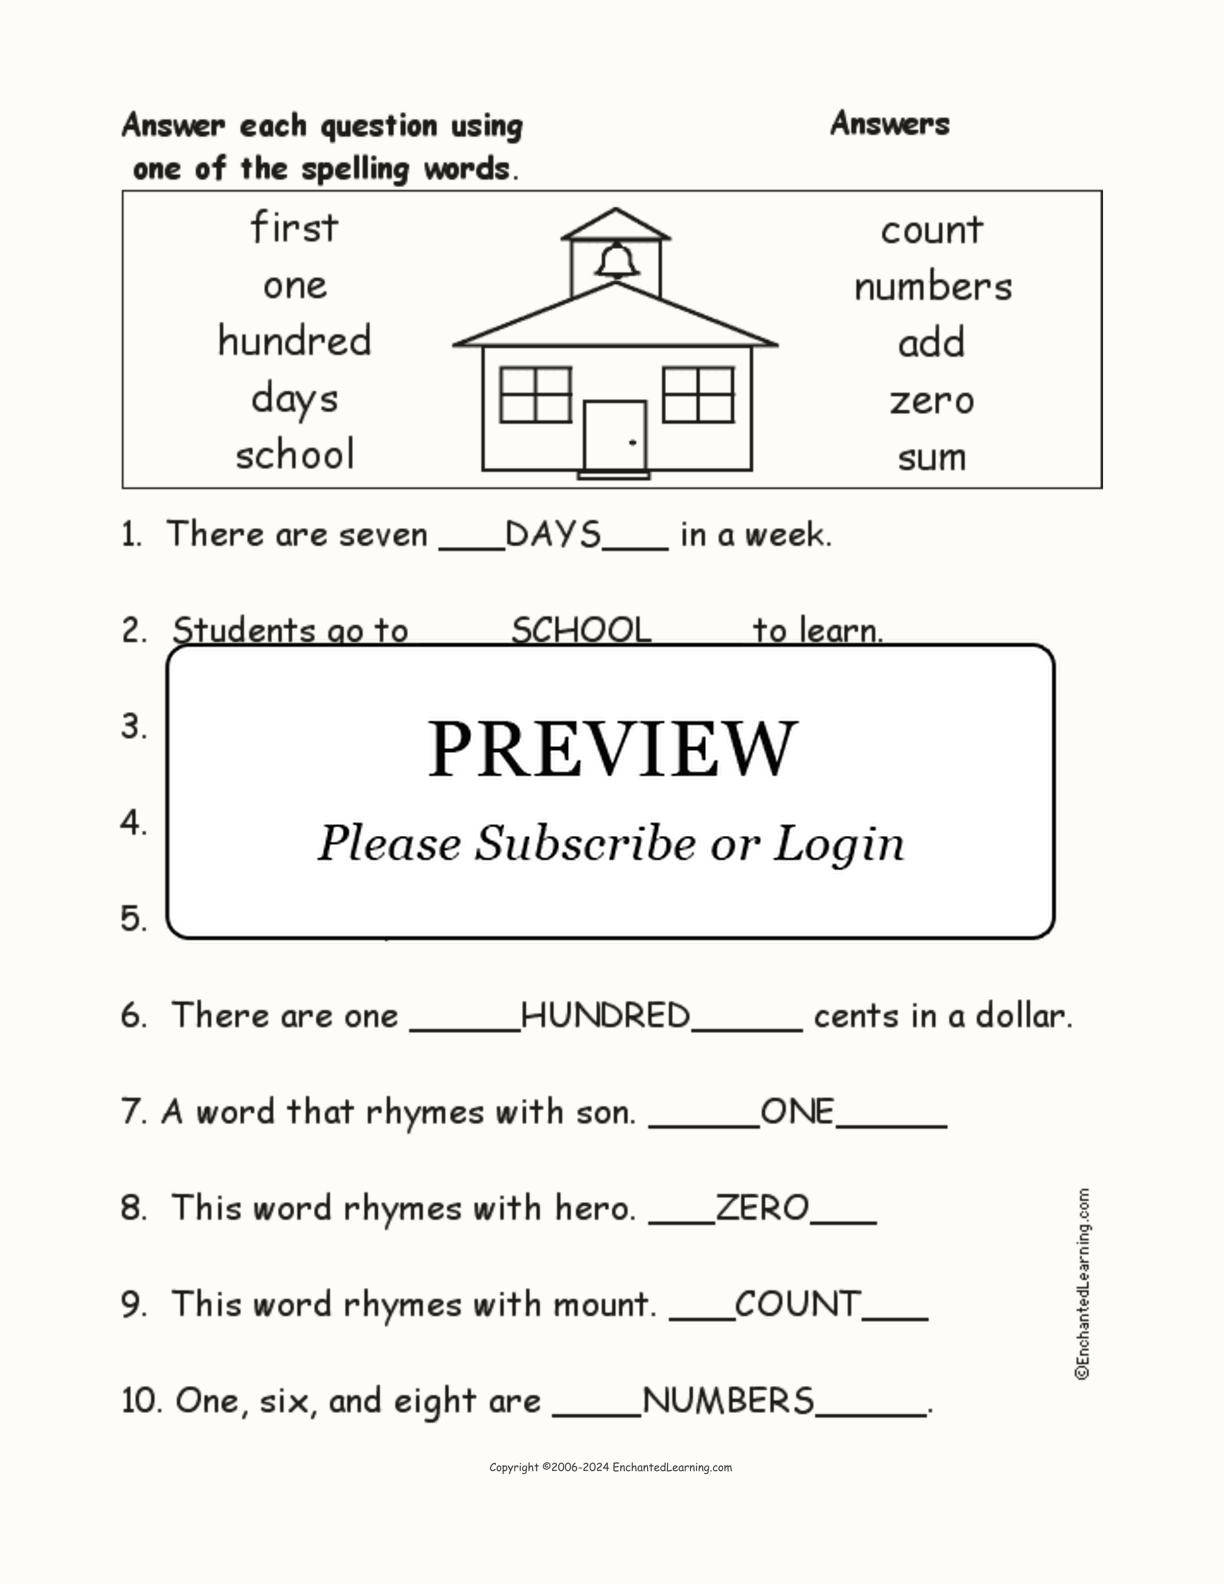 100th Day of School: Spelling Word Questions interactive worksheet page 2